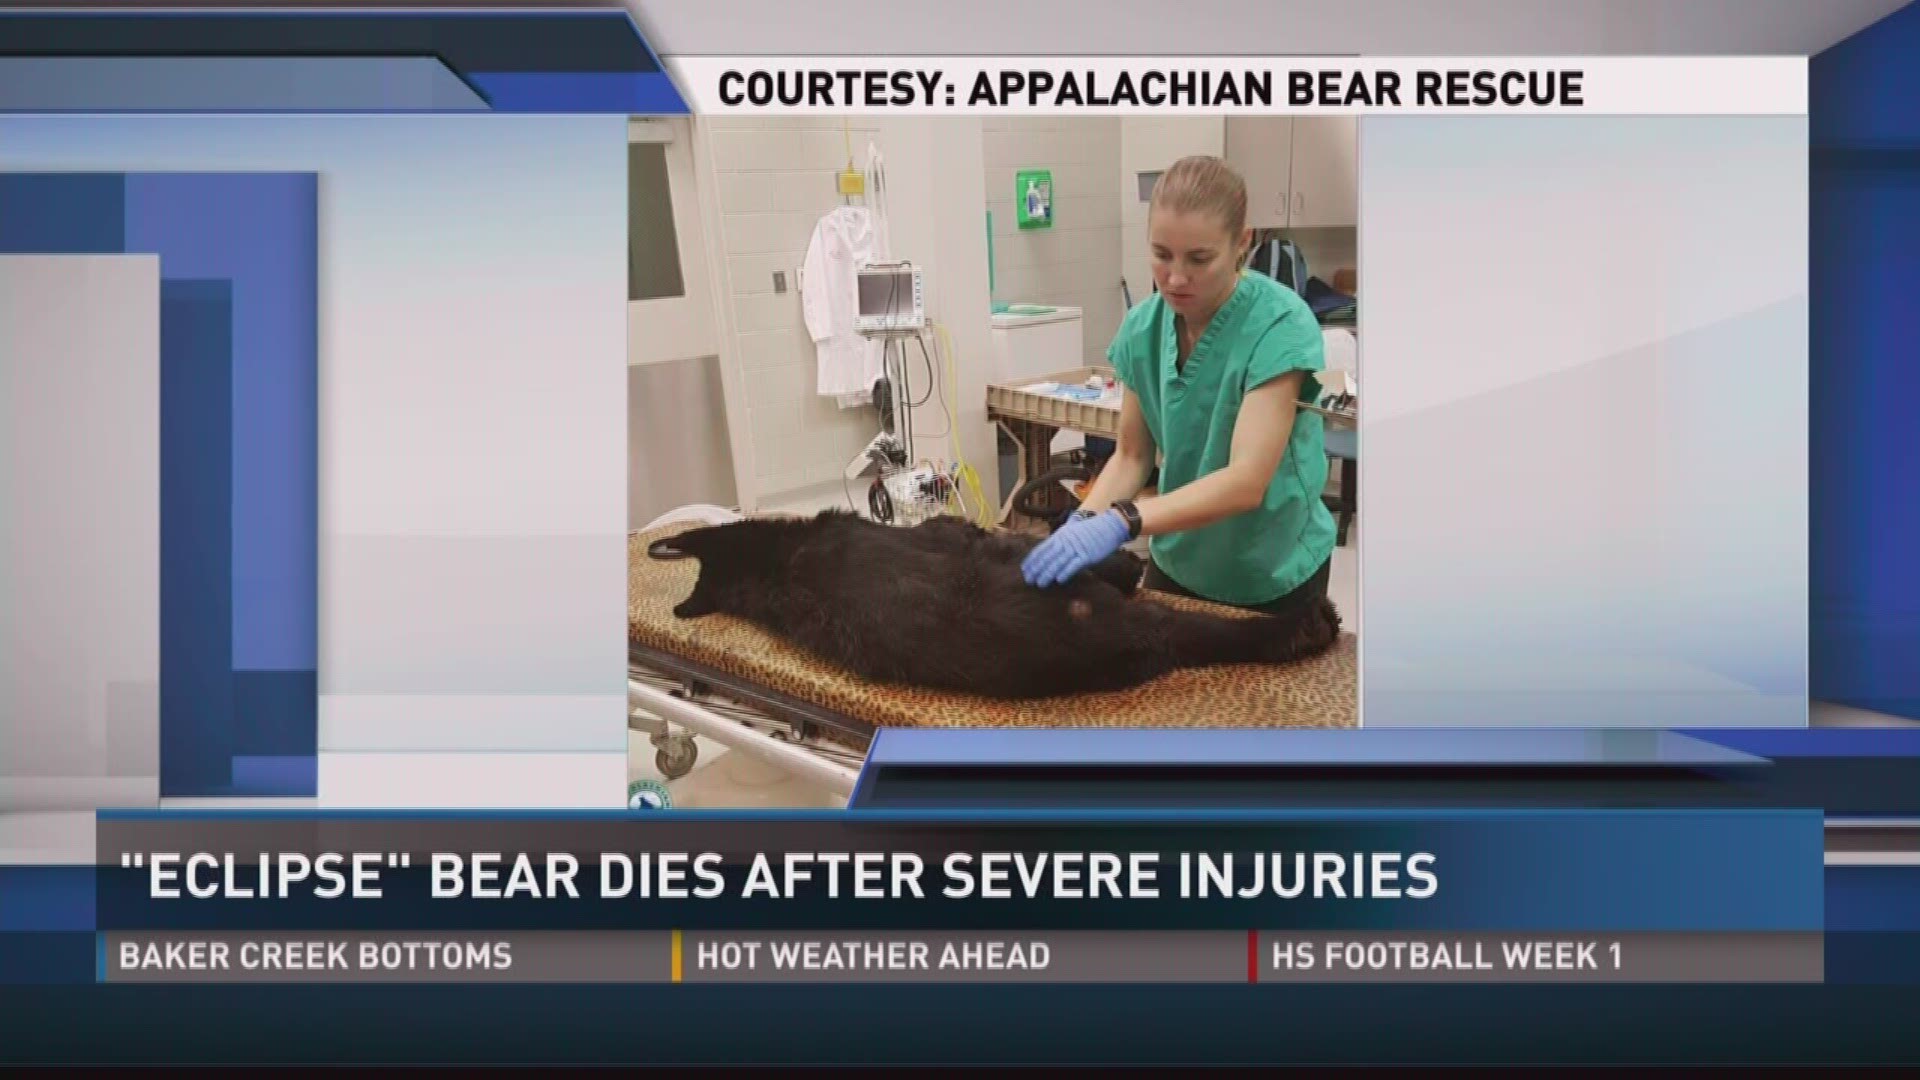 Aug. 18, 2017: A bear picked up by Appalachian Bear Rescue and named after the total solar eclipse has died from severe injuries.